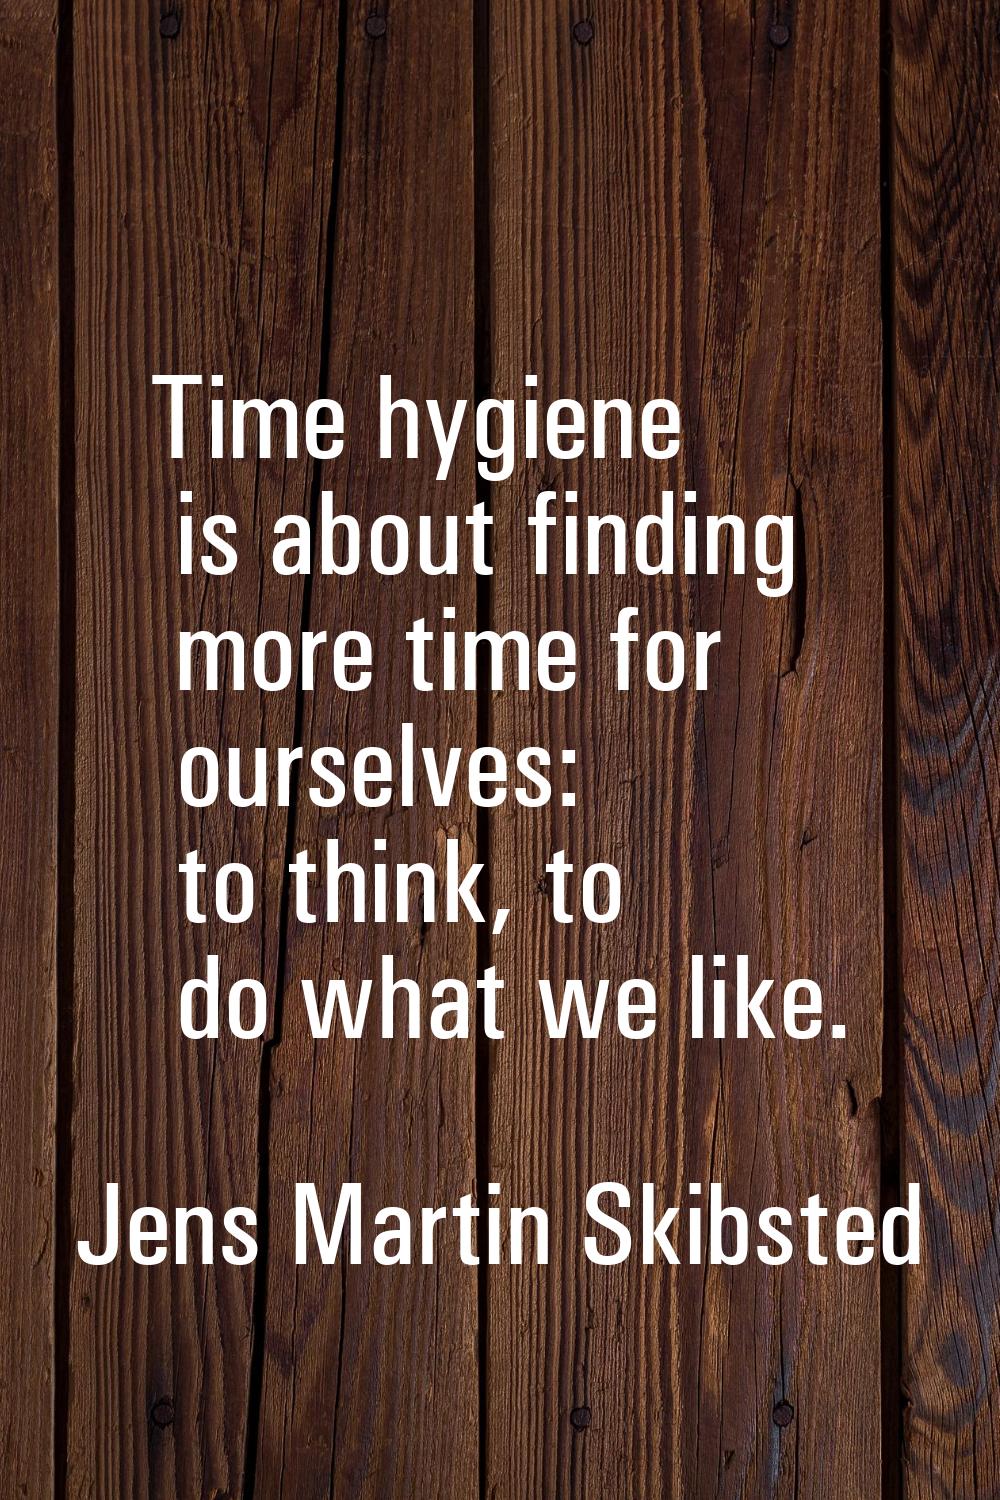 Time hygiene is about finding more time for ourselves: to think, to do what we like.